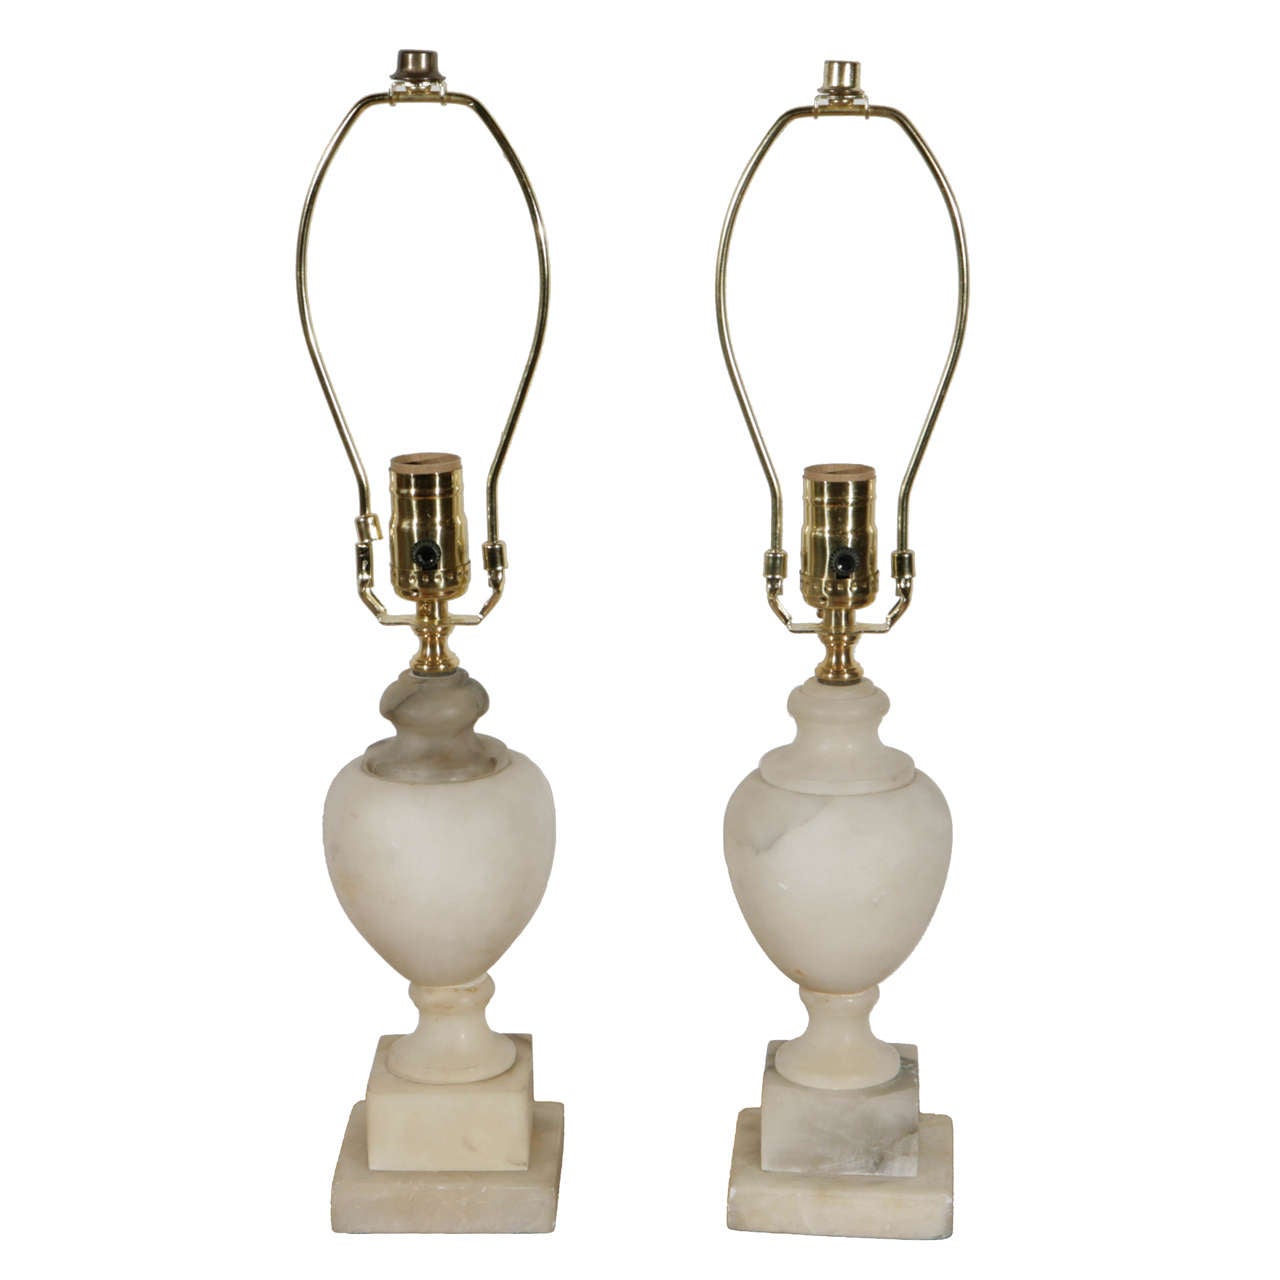 Pair of Small Alabaster Urn Accent Lamps